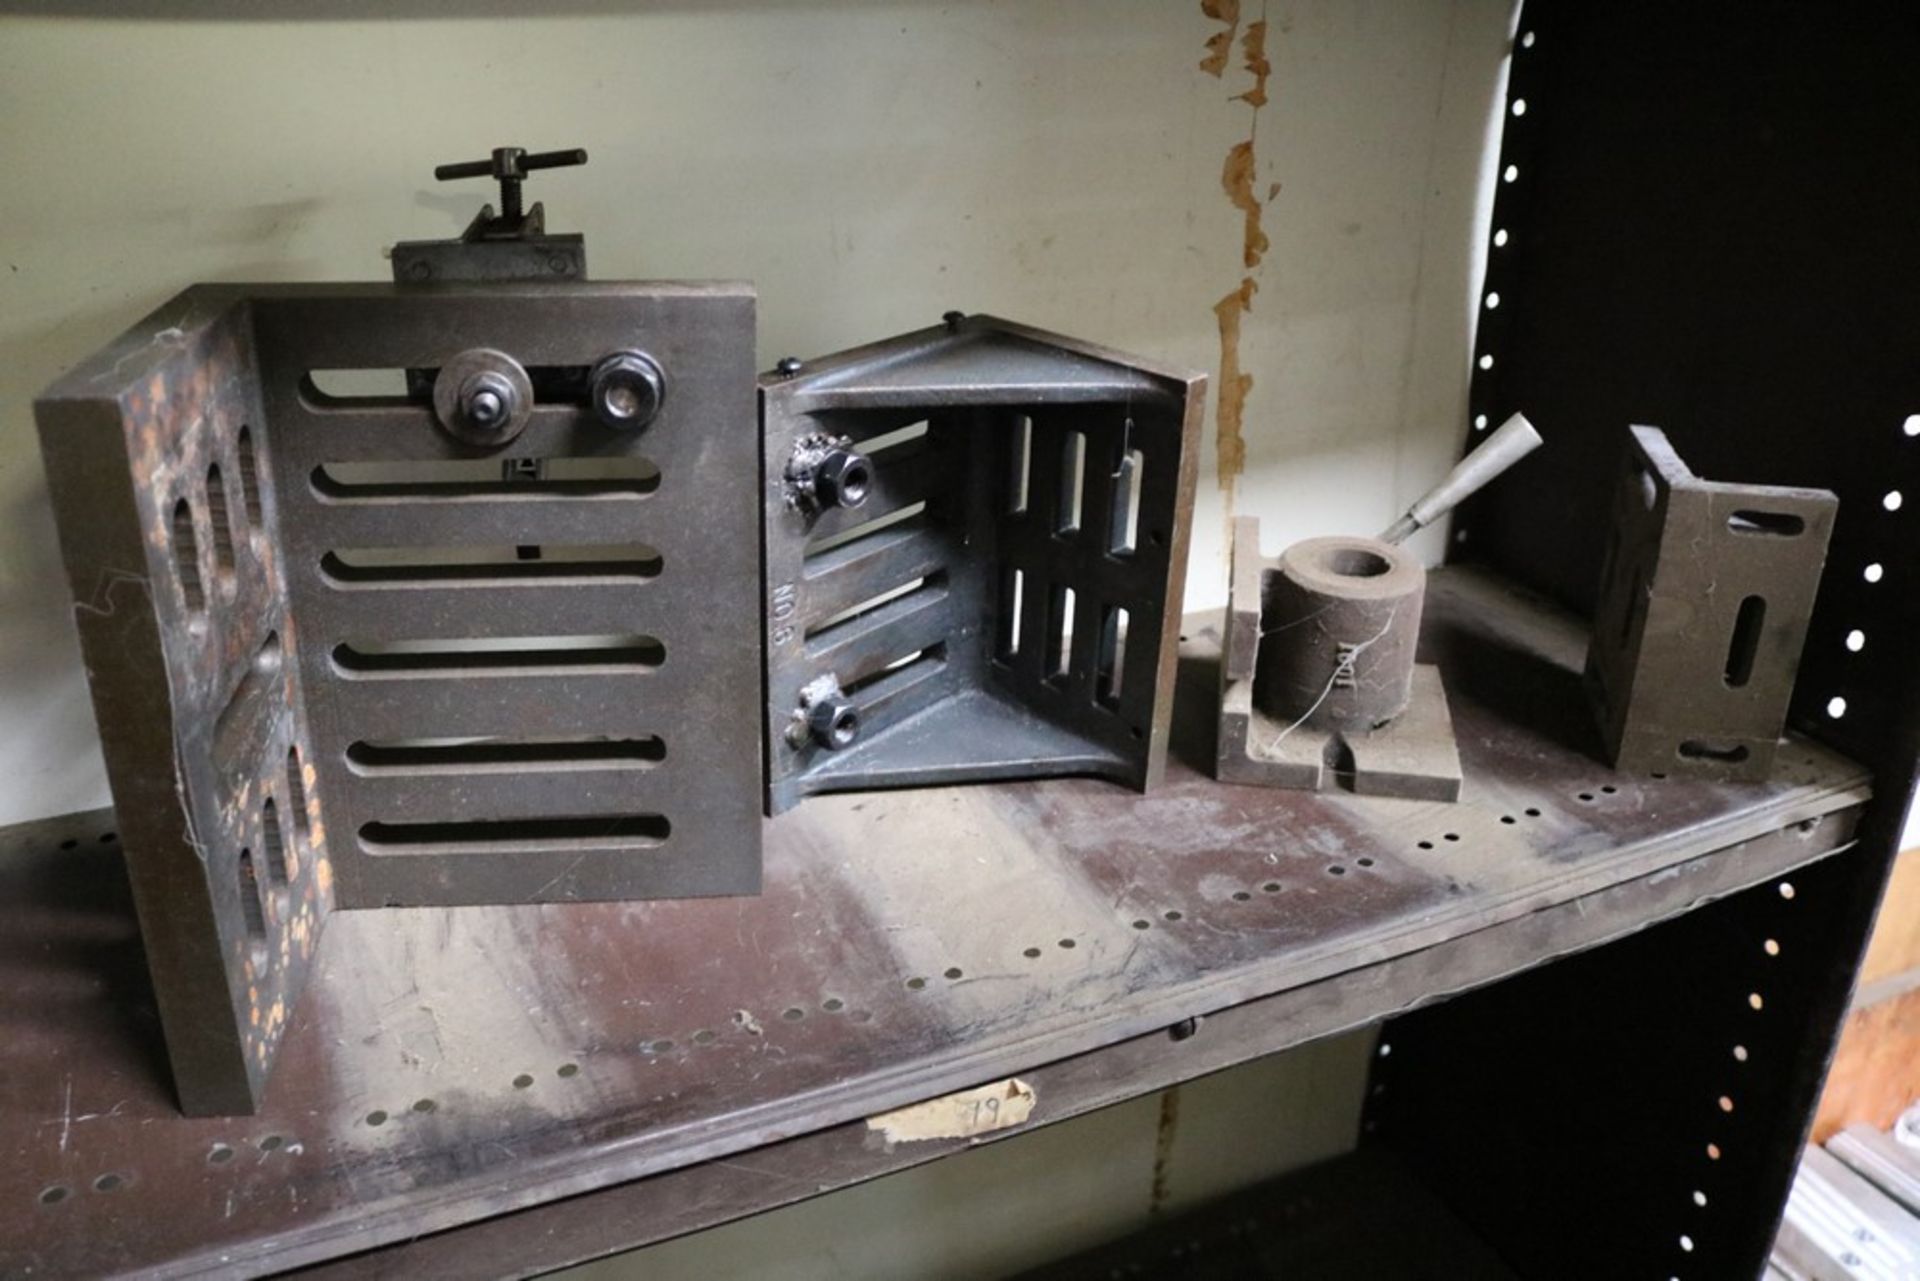 Workholding Angle Plates and 5C Collet Holder/Angle Plate Various Sizes